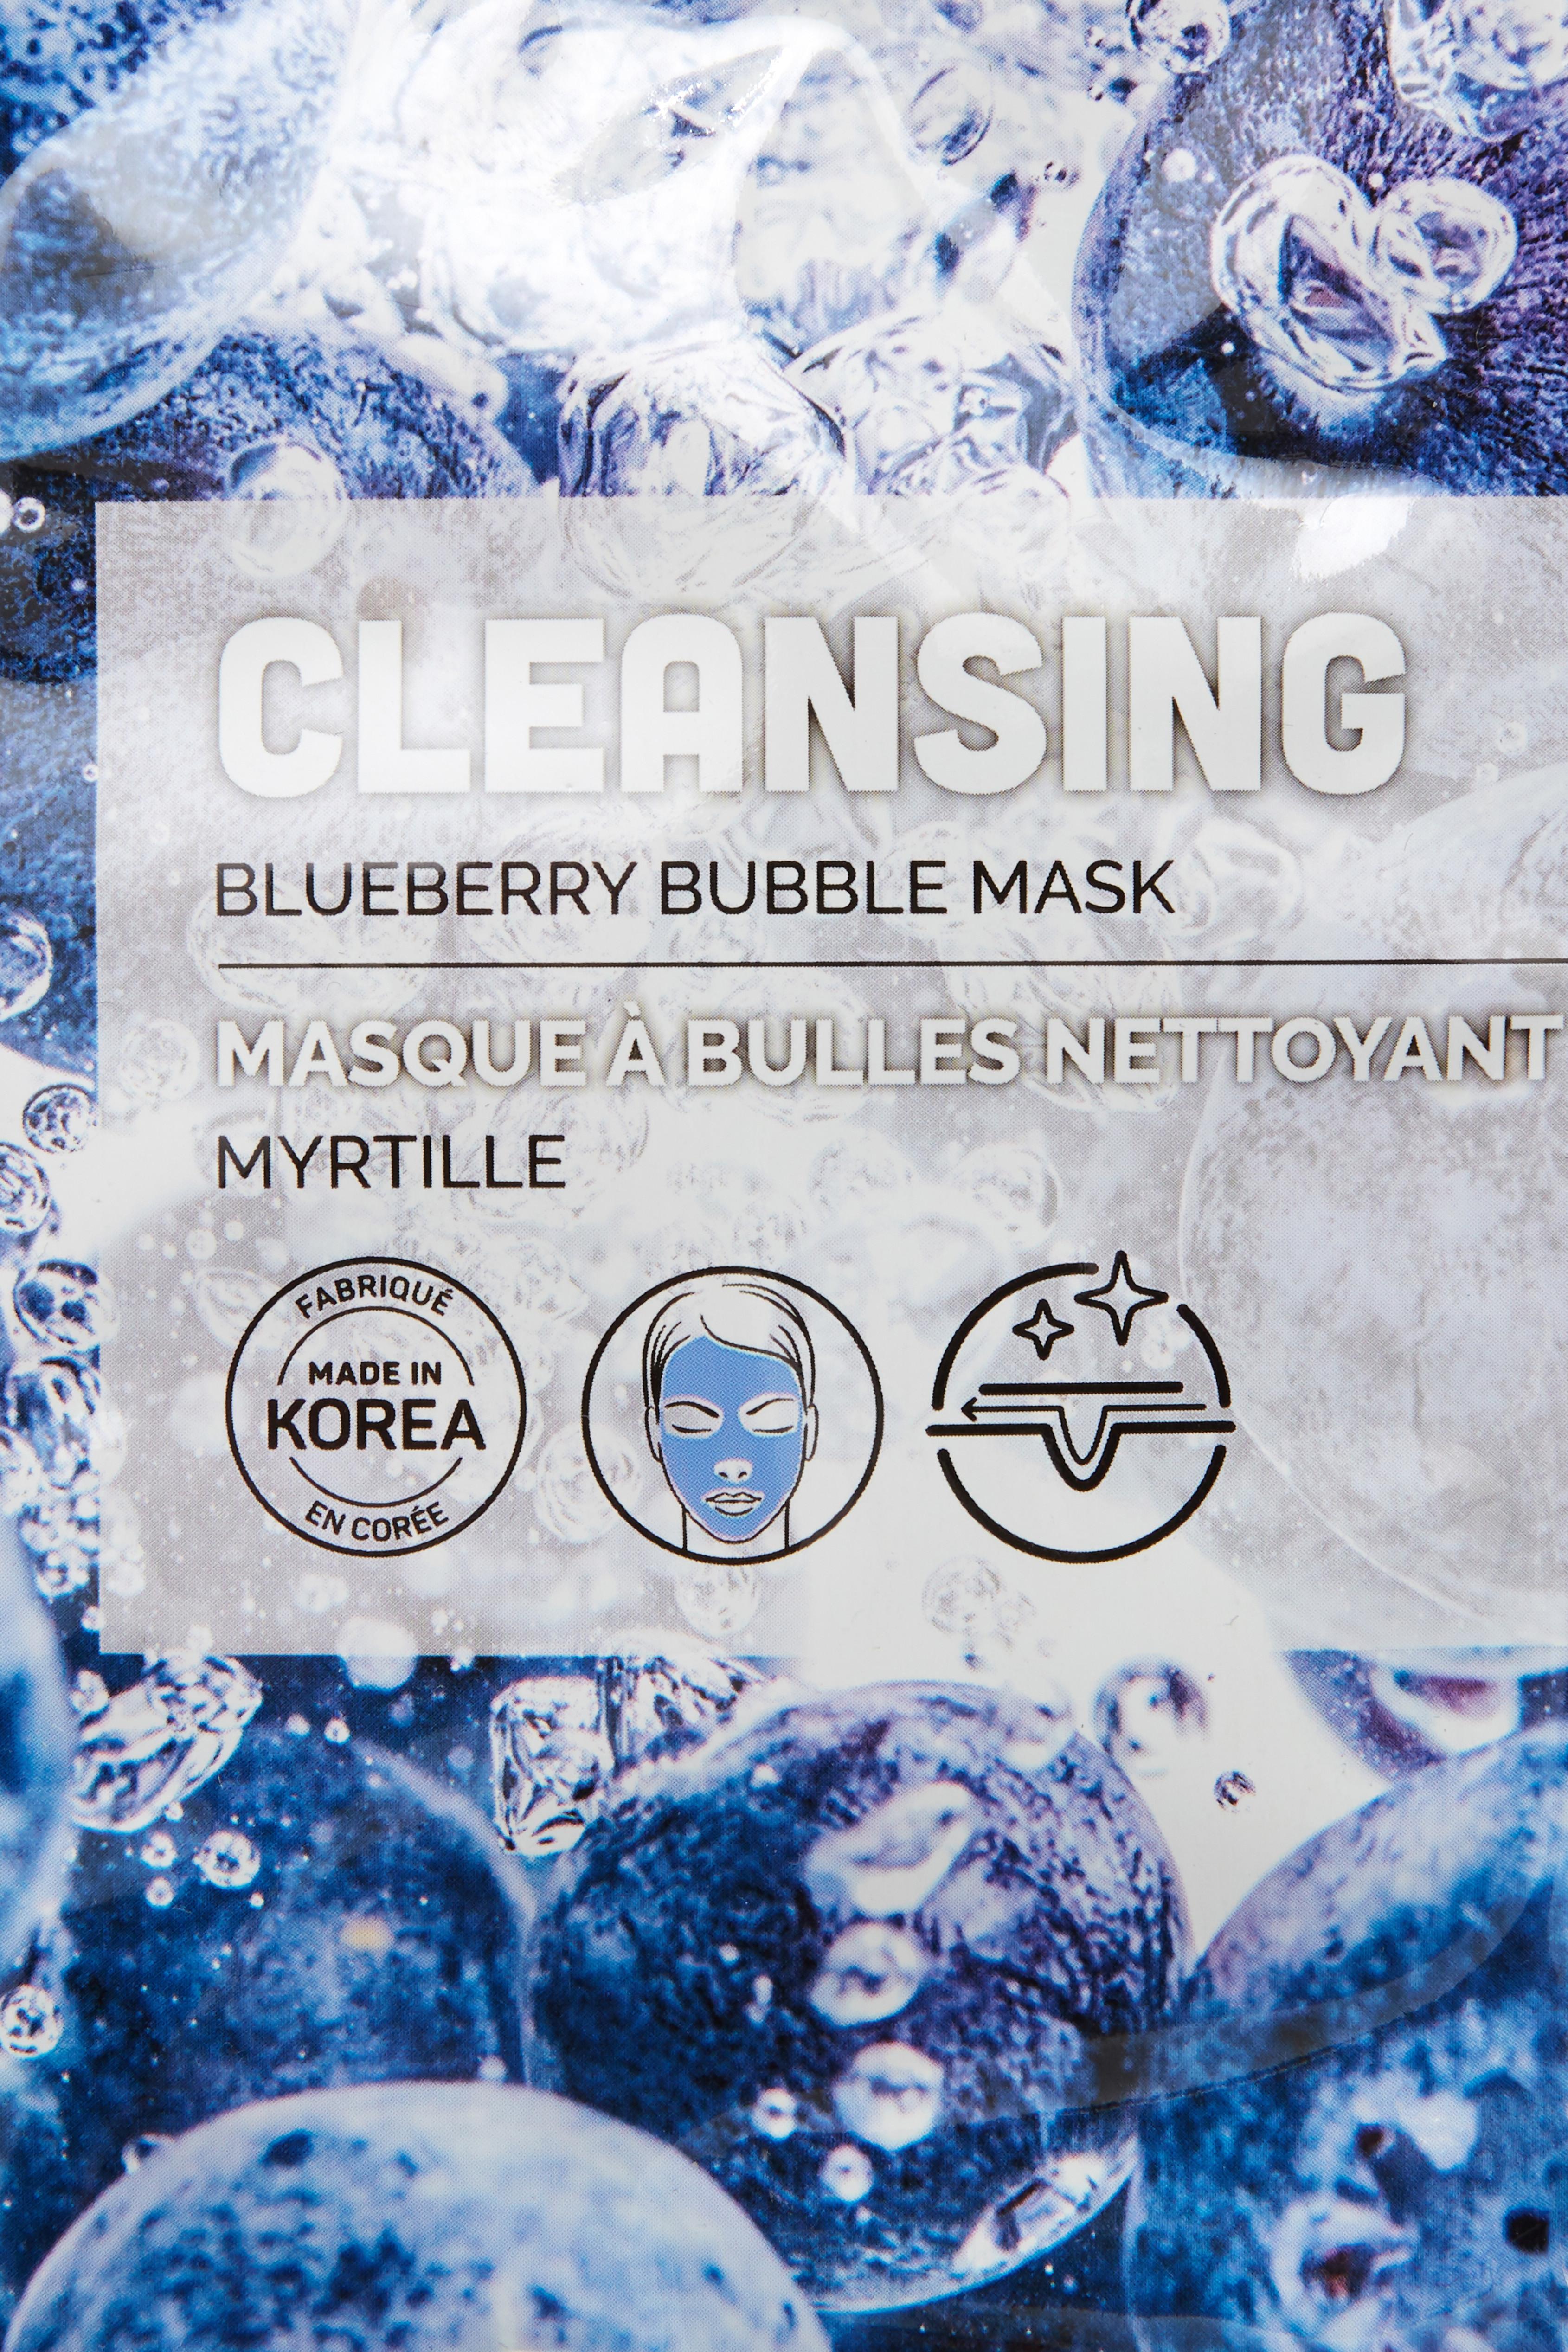 PS... Cleansing Blueberry Bubble Face Mask